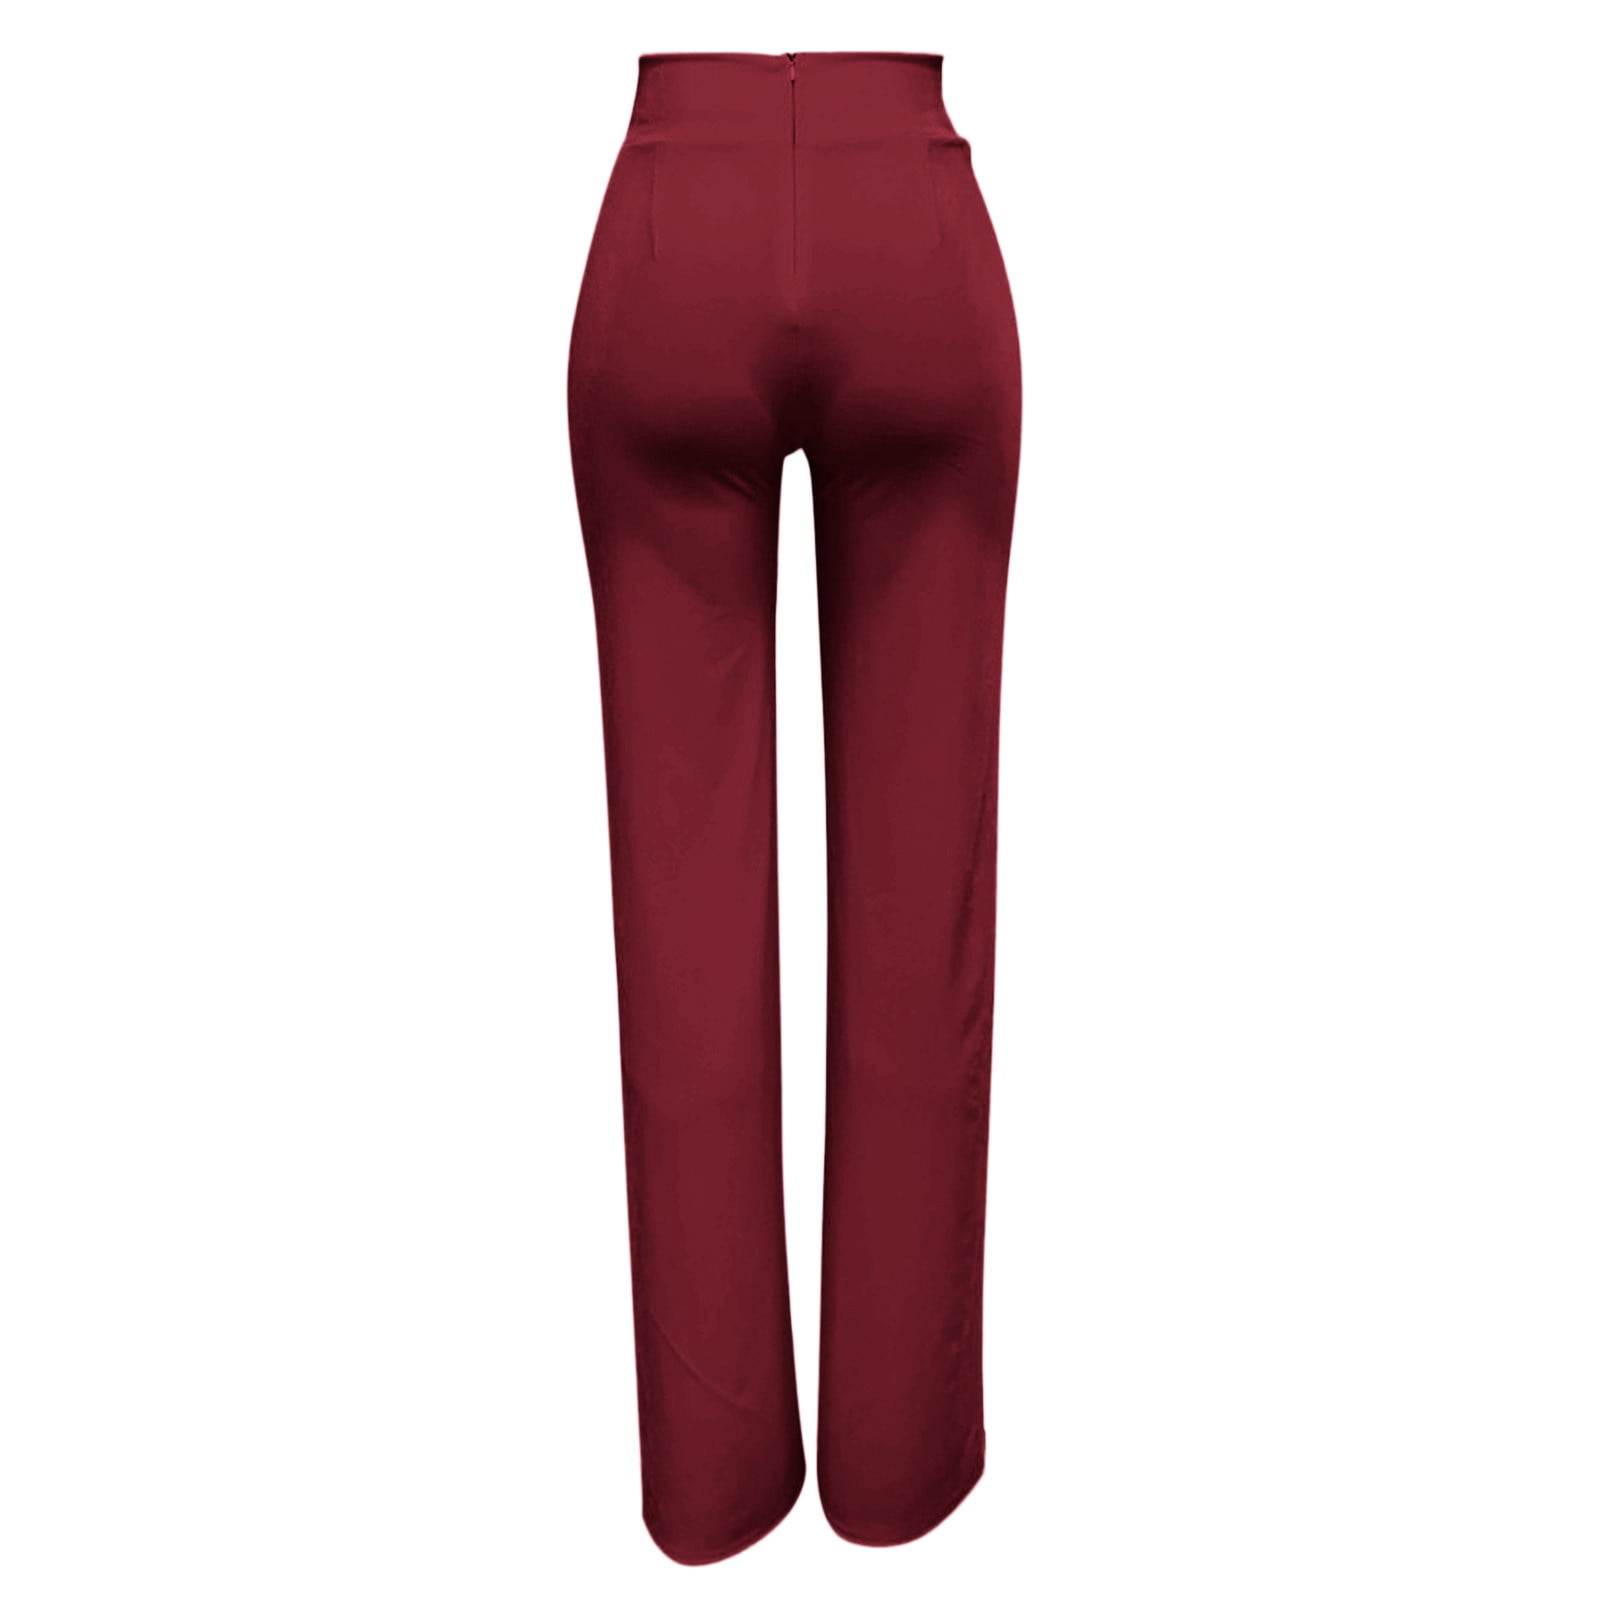 Women's Fashion Dress Pants Womens Black Work Pants Solid Stretch High  Waist Zipper High Waist Straight Pants With Pocket Trousers winter clothes  for women 